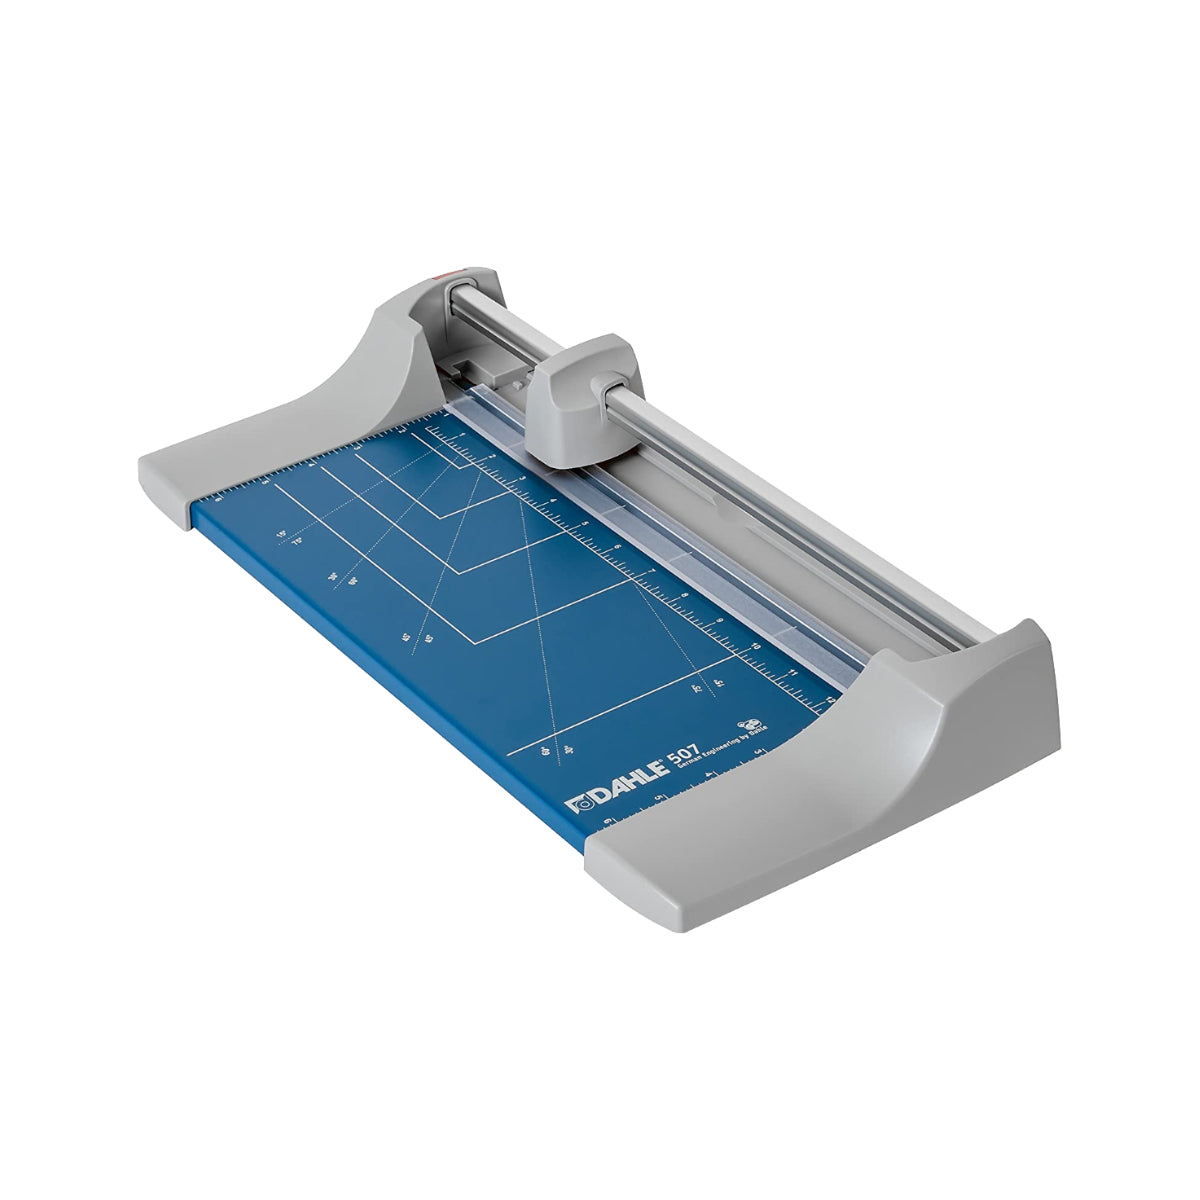 Dahle 507 Personal A4 Rotary Trimmer